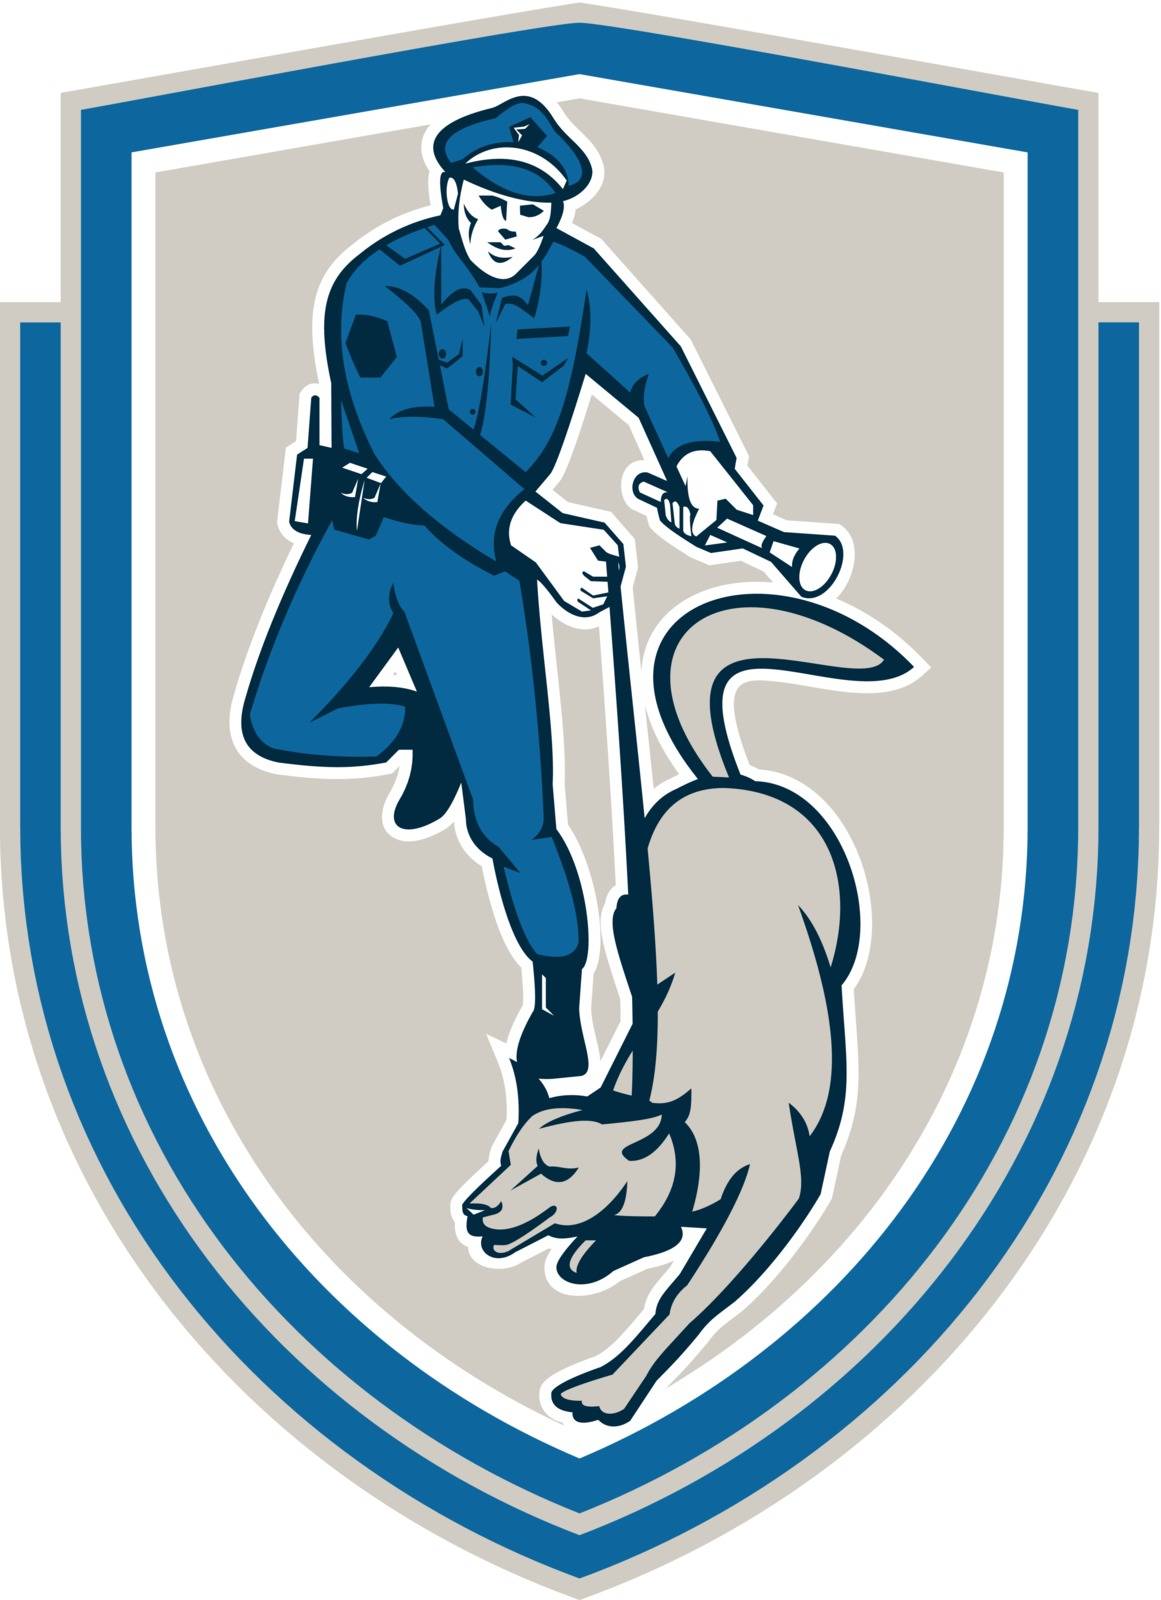 Illustration of a policeman police officer holding torch flashlight with trained police guard dog canine viewed from front set inside shield crest on isolated background done in retro style.